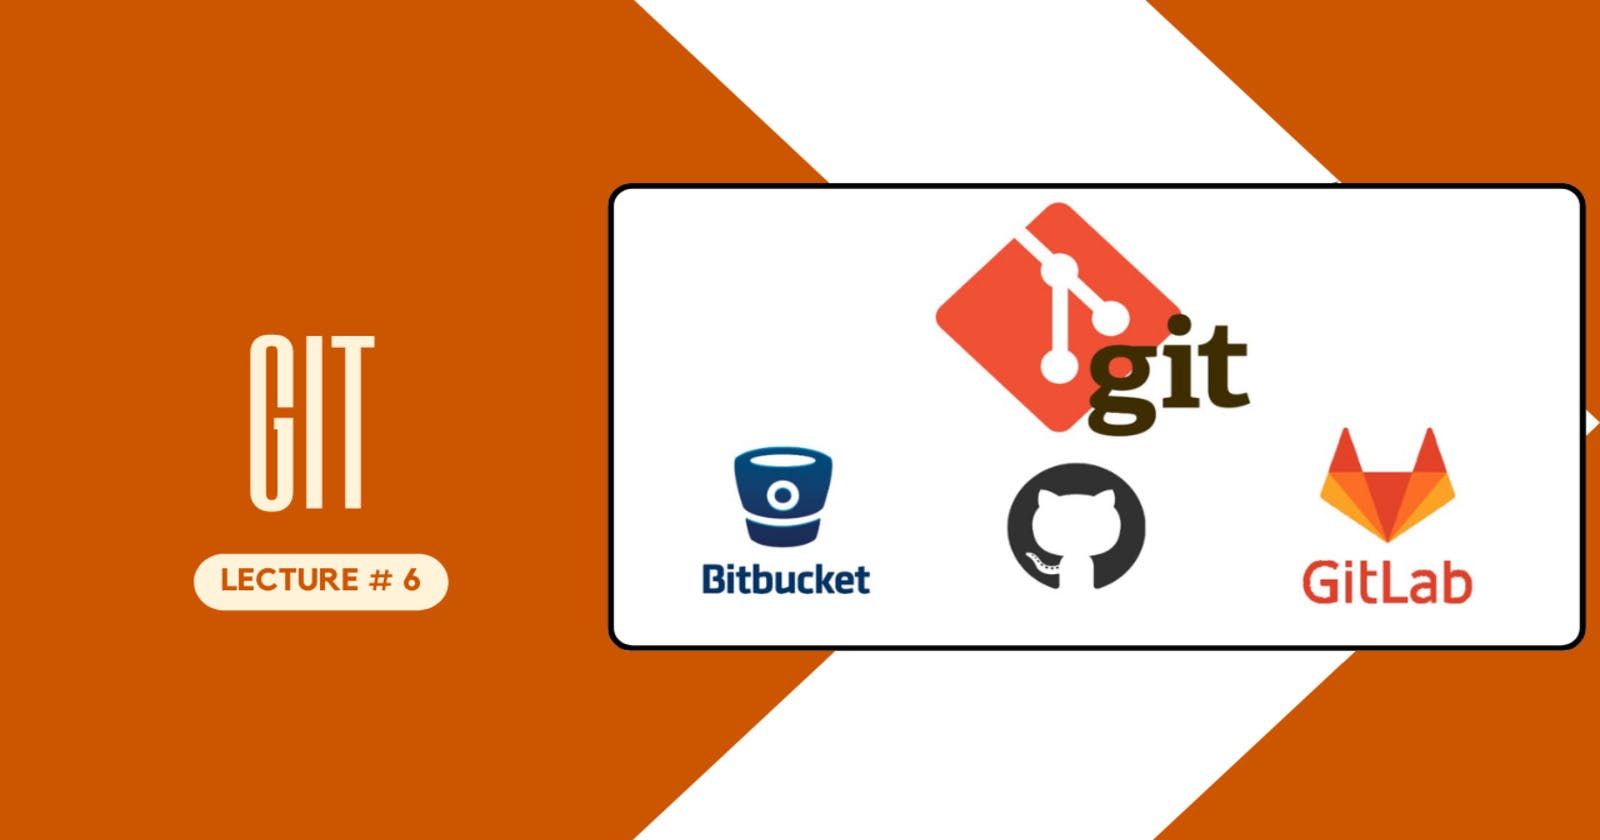 Lecture # 6 - Setup Git Repository remotely on GitHub